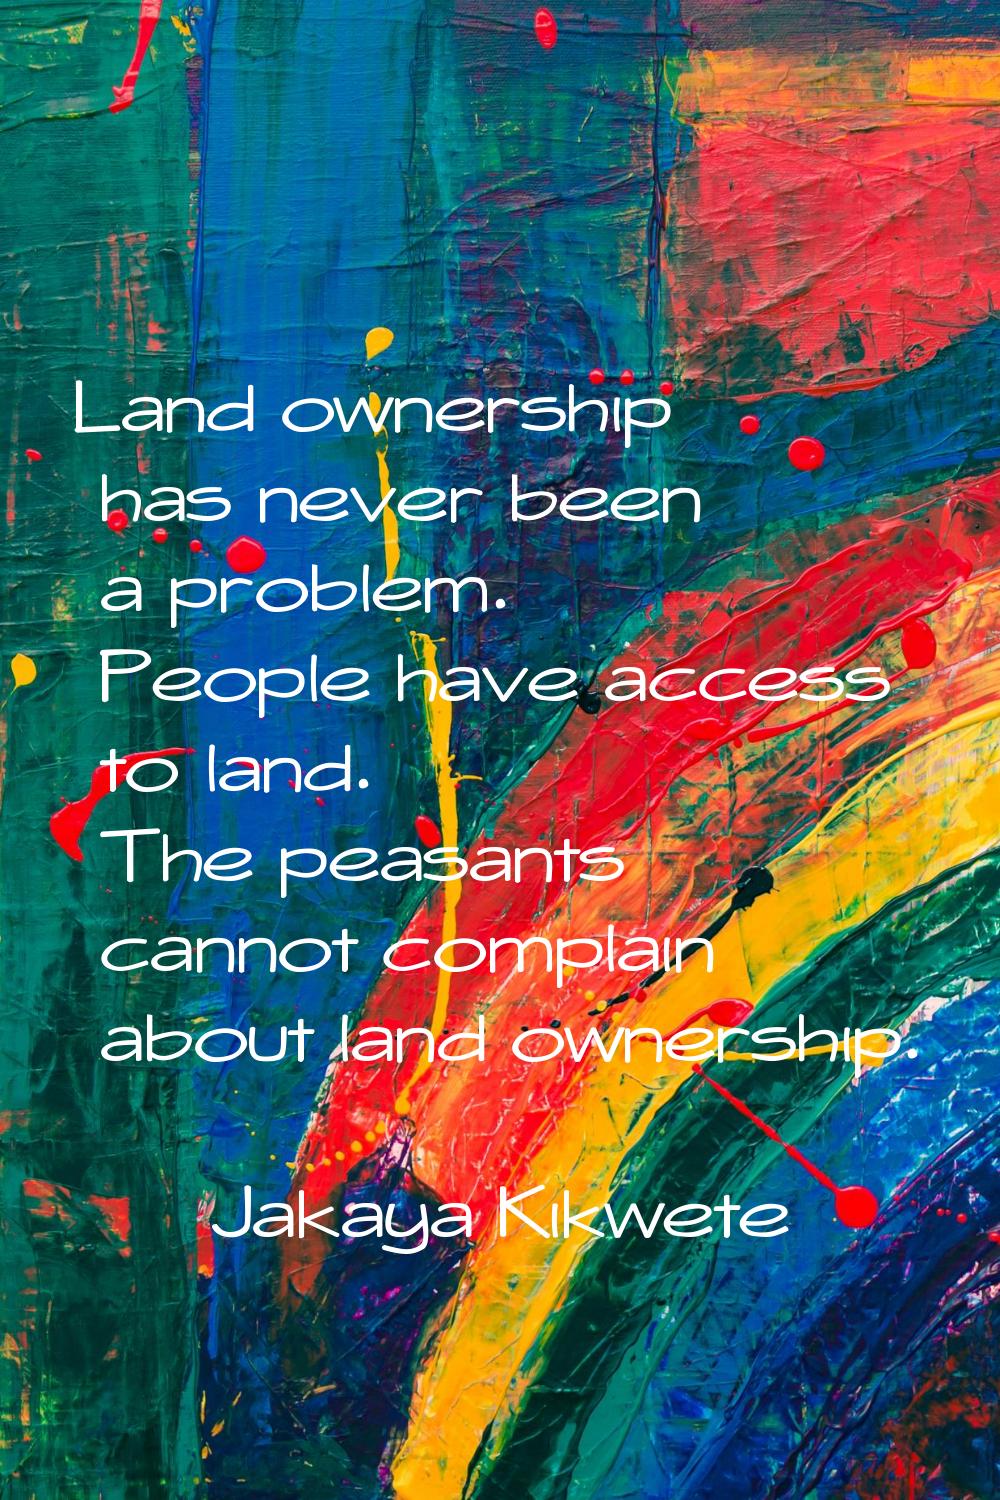 Land ownership has never been a problem. People have access to land. The peasants cannot complain a